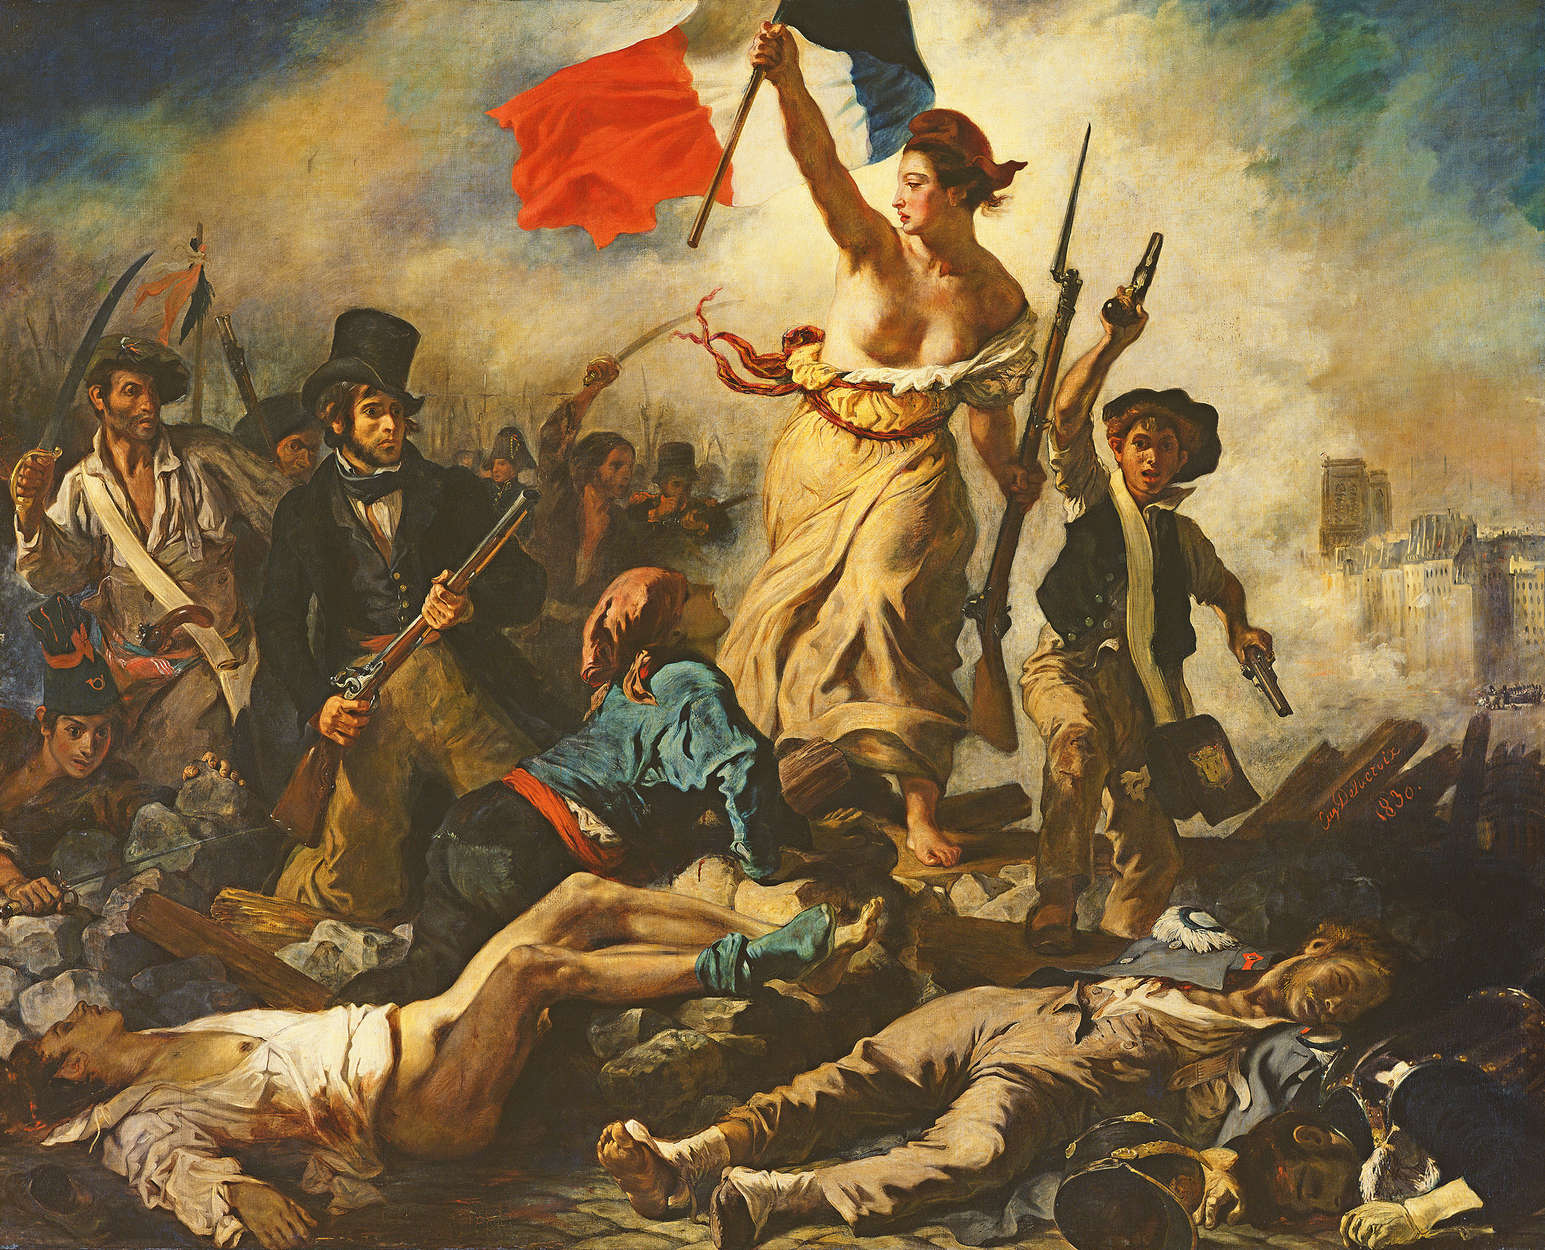             Photo wallpaper "The freedom that leads the people" by Eugène Delacroix
        